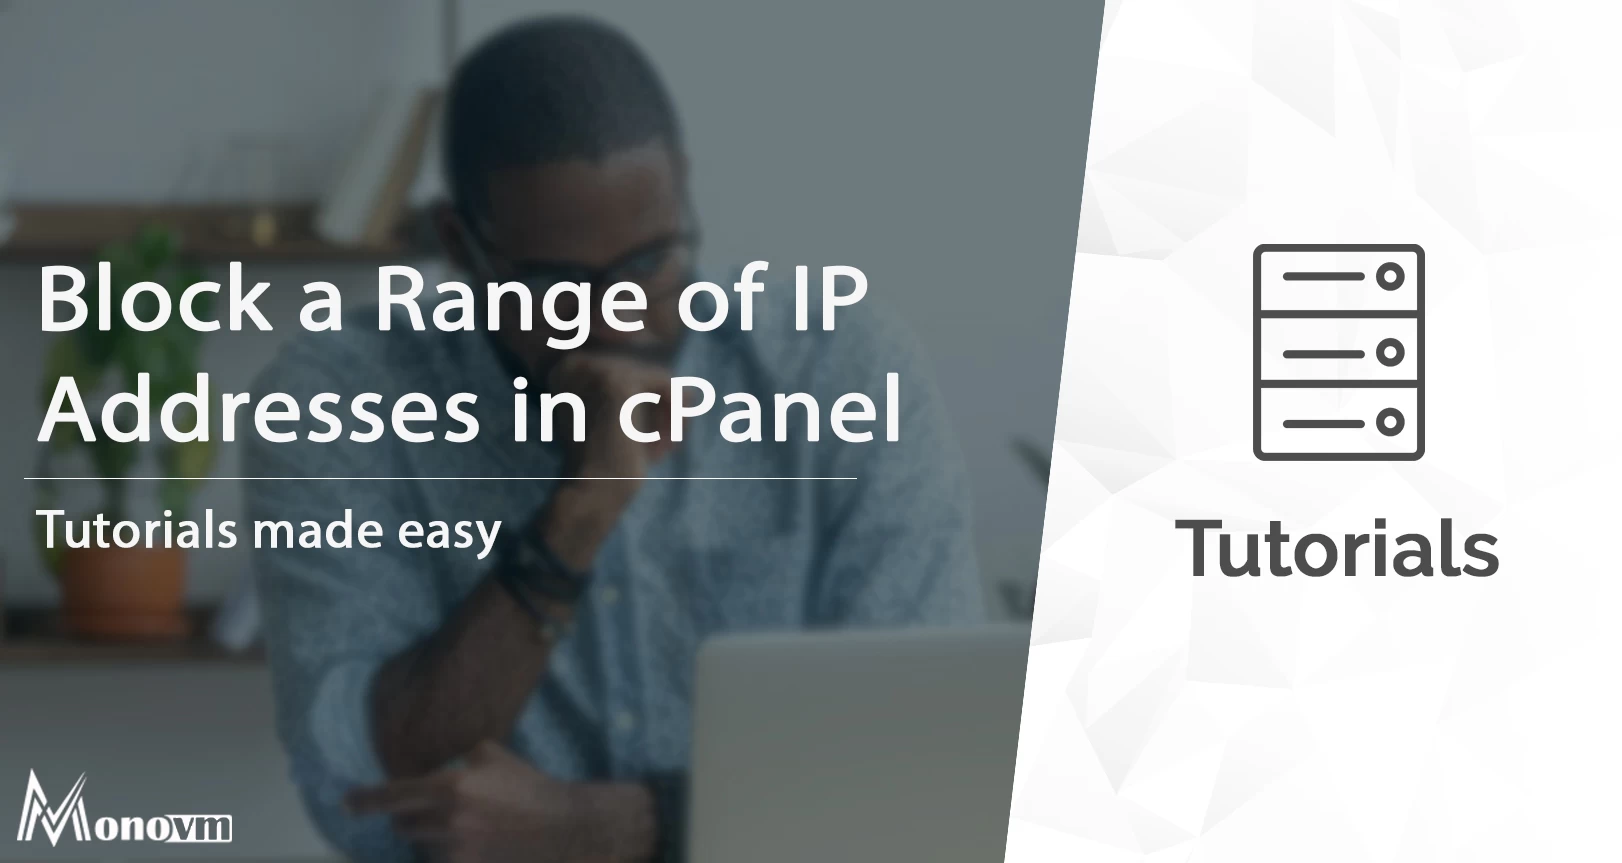 How to Block a Range of IP Addresses in cPanel